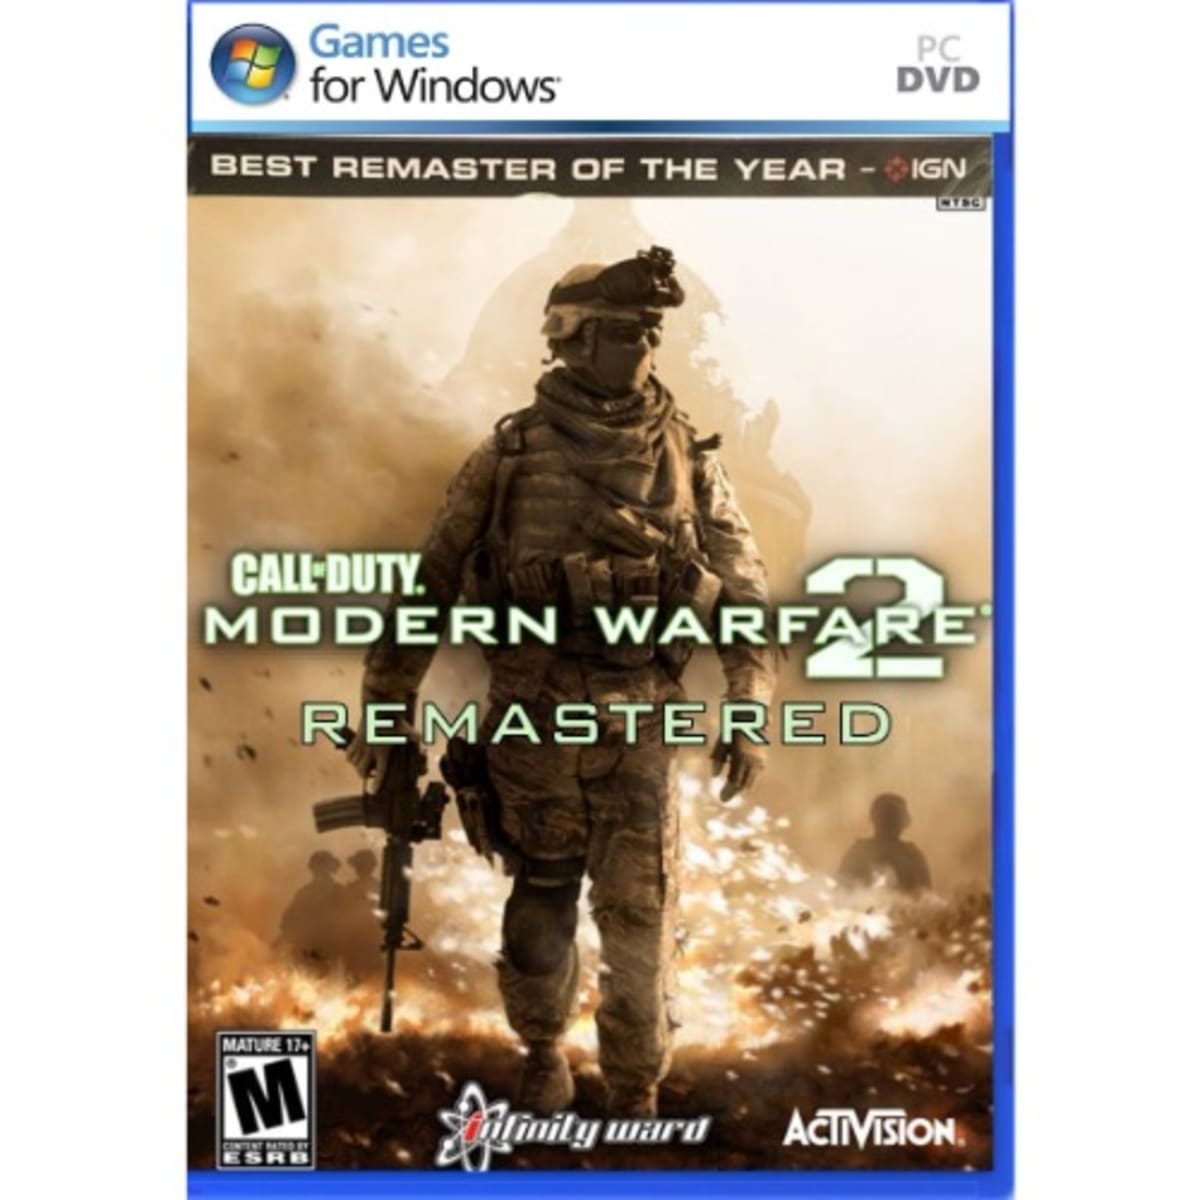 Buy Call of Duty Modern Warfare 2 Campaign Remastered - PS4